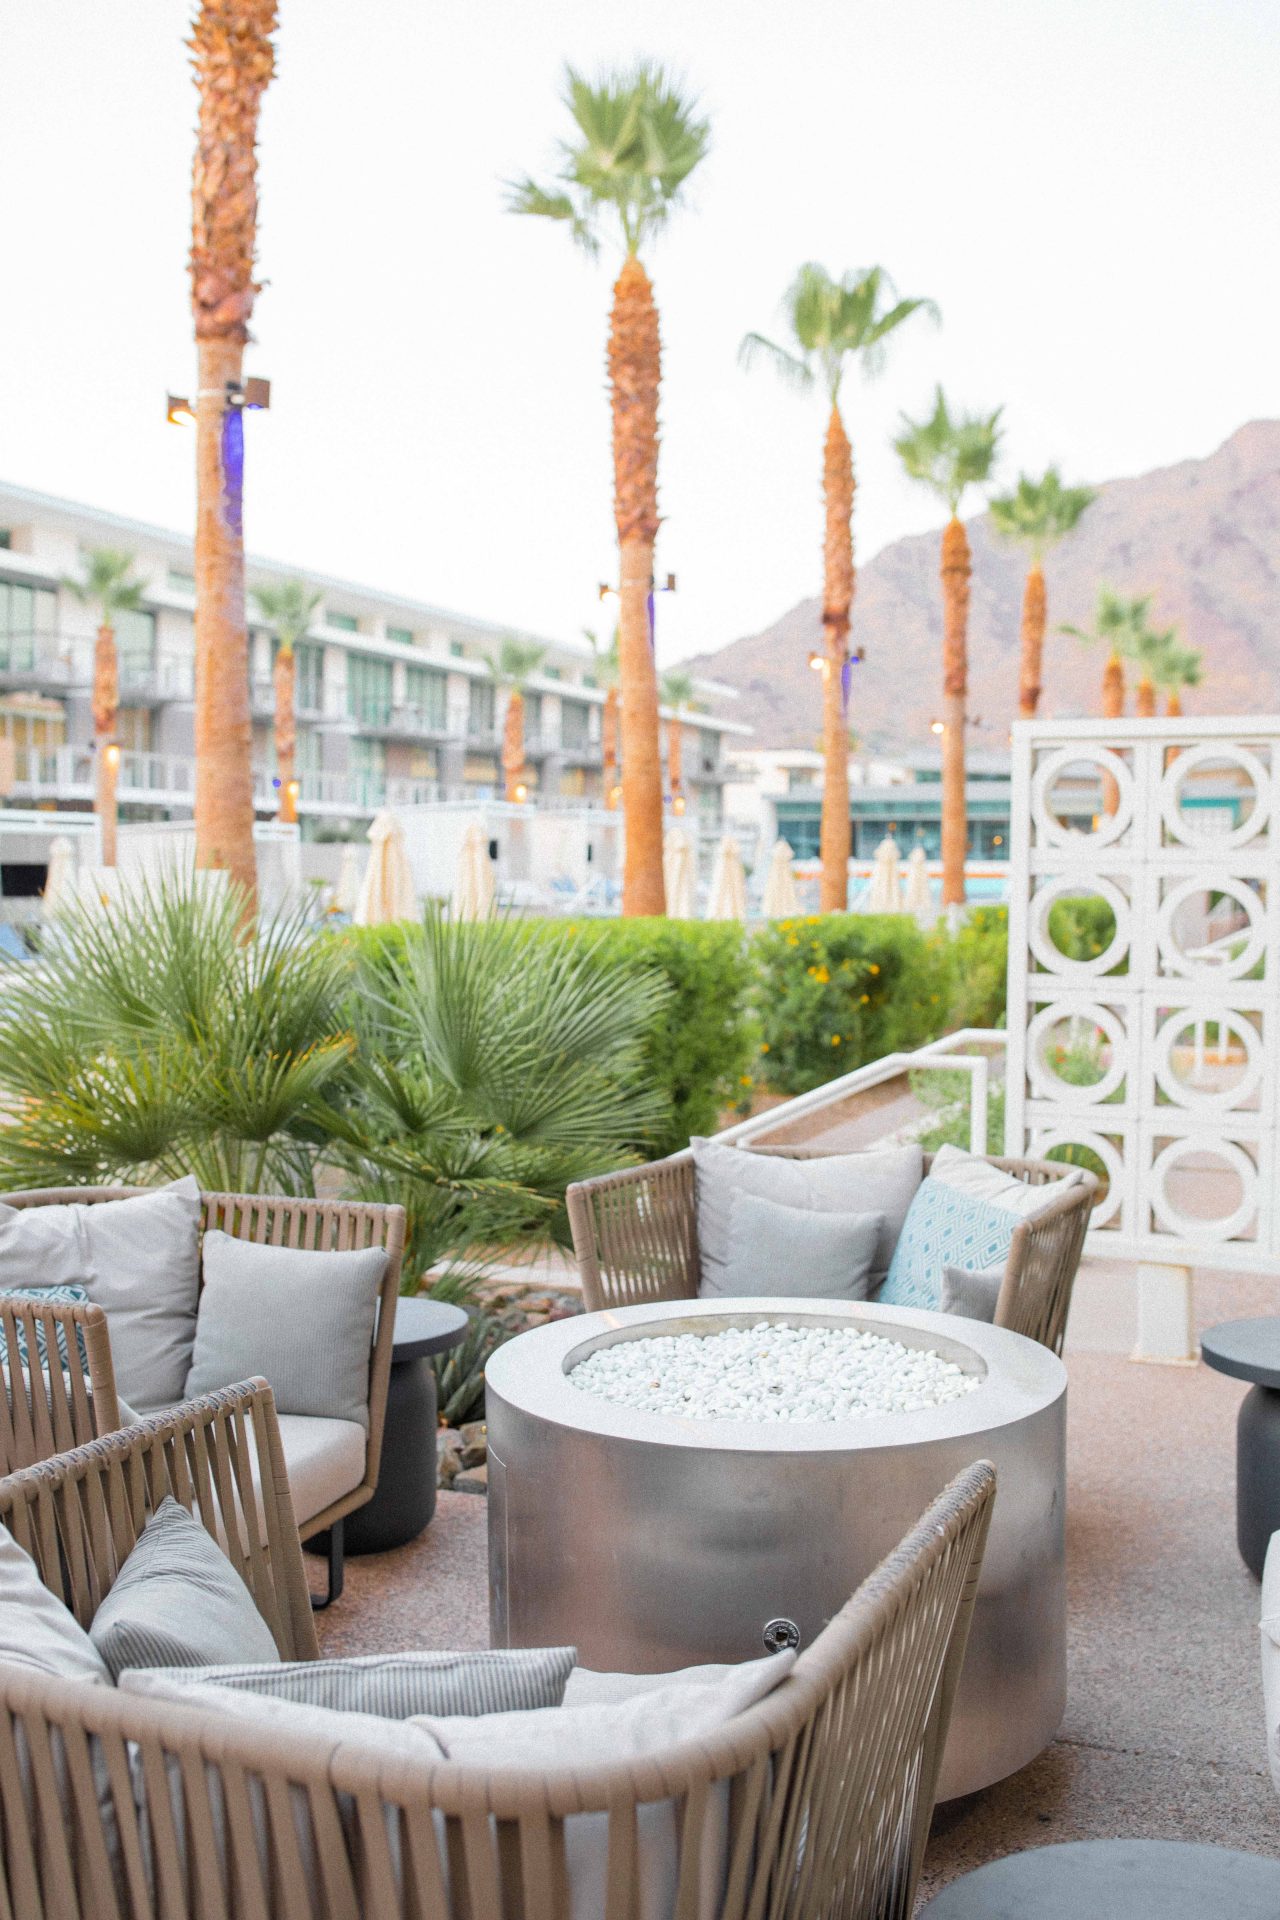 mountain shadows resort scottsdale Arizona, luxury resort, travel guide, scottsdale Arizona travel guide, pool day, blog, blog post, healthy poolside day, dressing, avocado toast, drinks by the pool, honeymoon, what to do in scottsdale